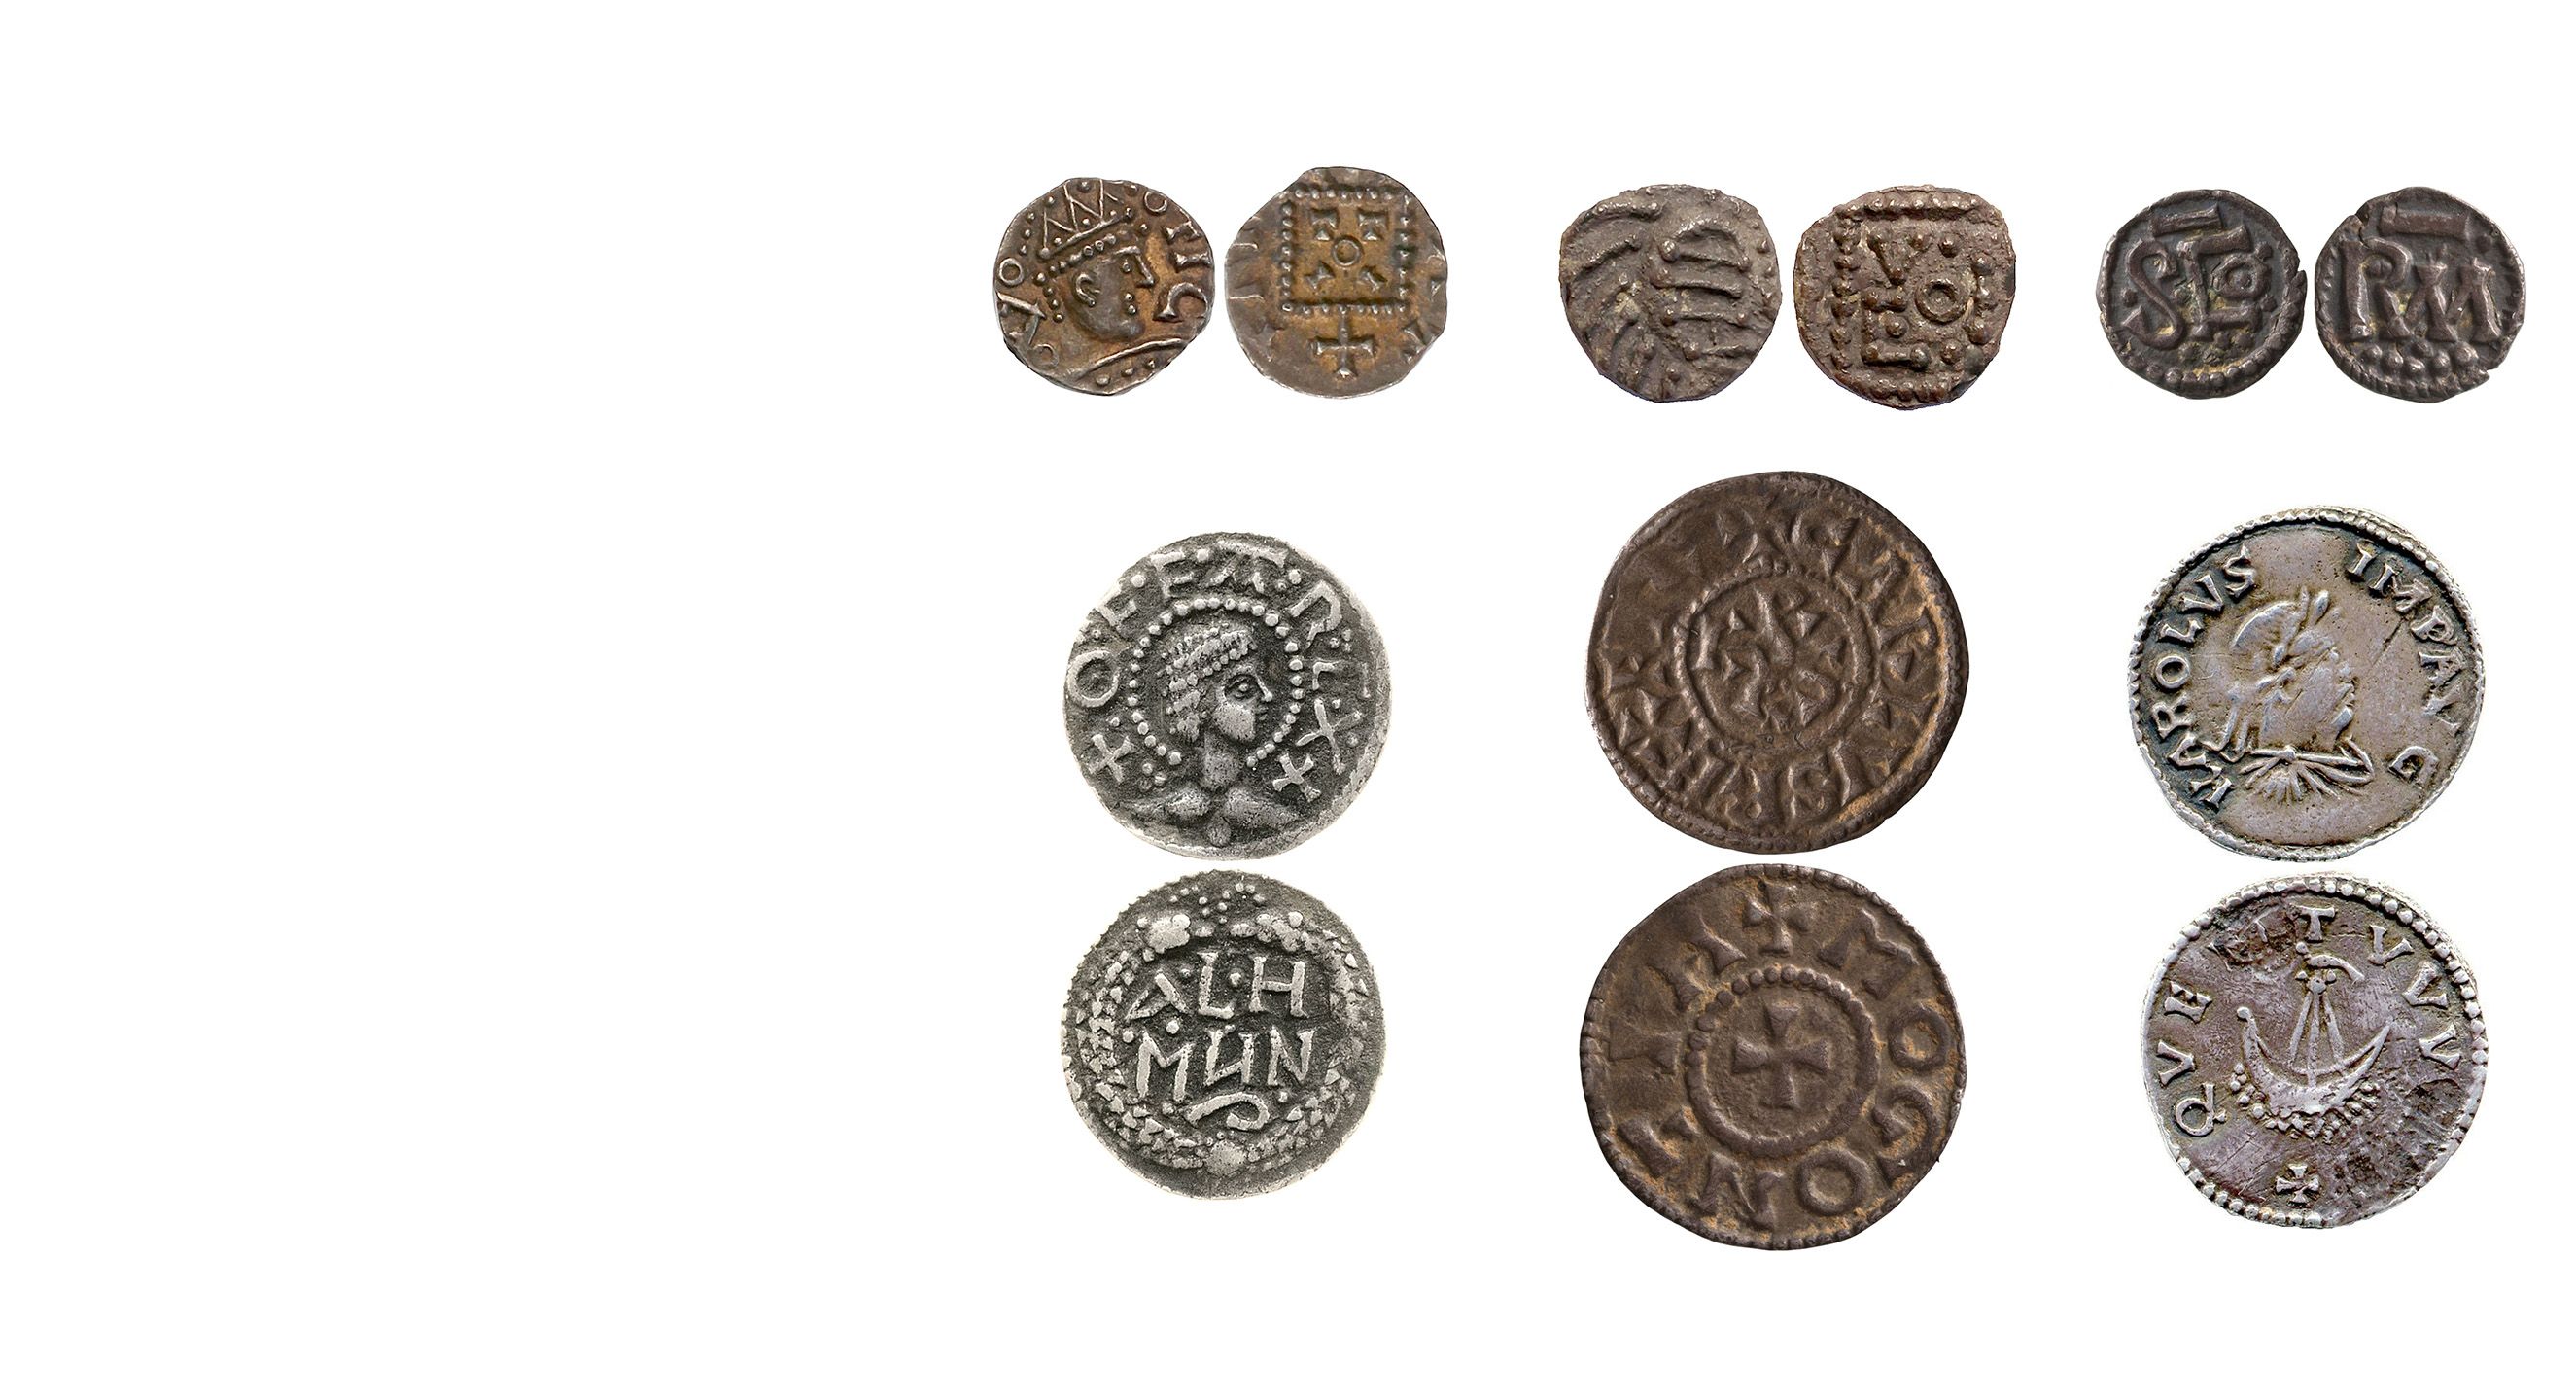 A group of early mediaeval silver coins from the Fitzwilliam Museum tested as part of the study led by Prof. Rory Naismith, University of Cambridge